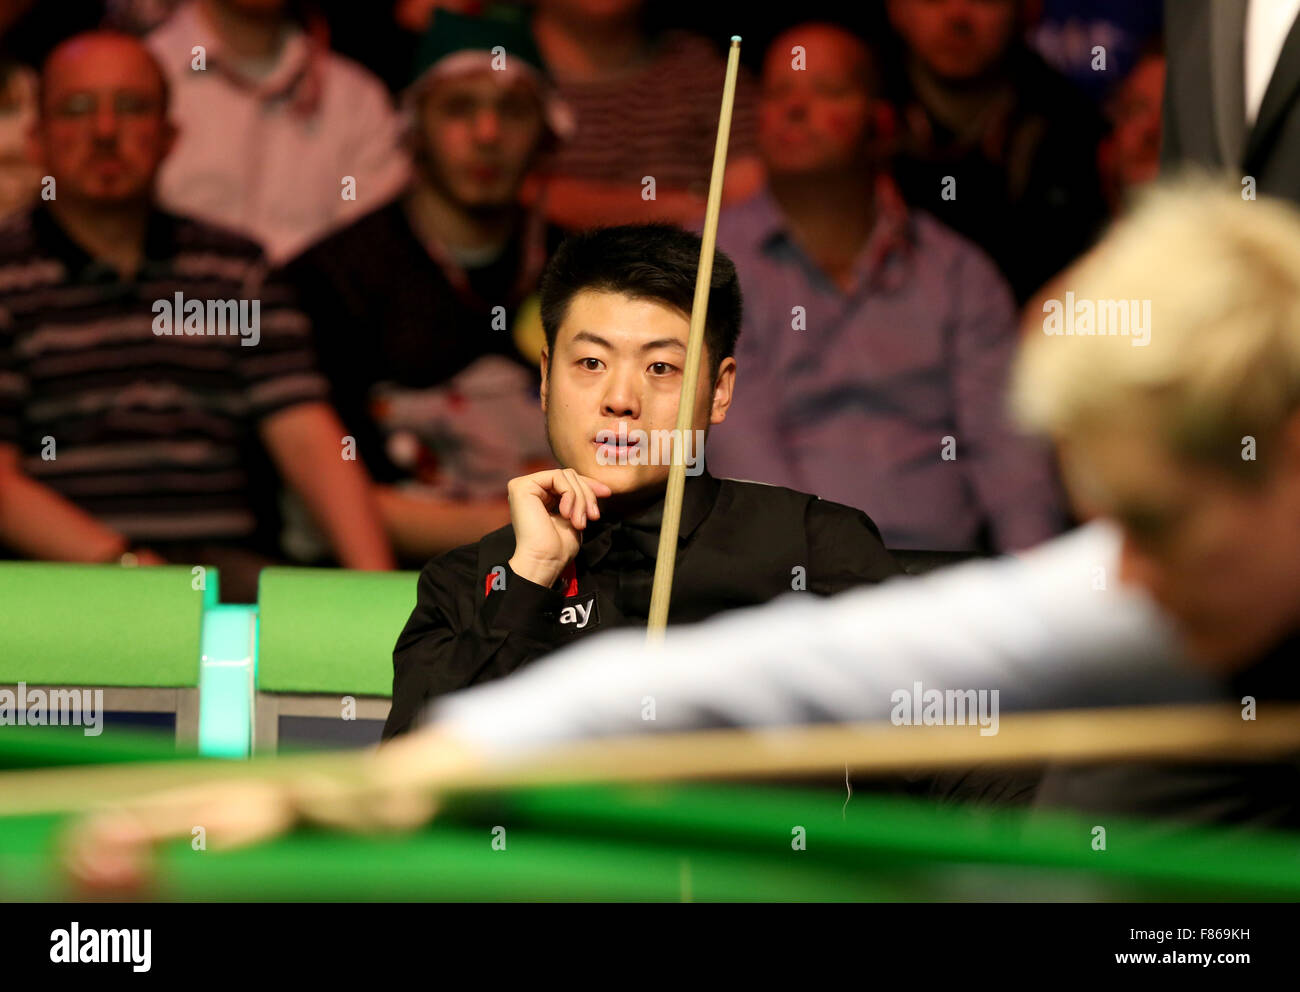 (151206) -- YORK, Dec. 6, 2015 (Xinhua) -- Liang Wenbo of China reacts during the final match against Neil Robertson of Australia at Snooker UK Championship 2015 in York, Britain, Dec. 6, 2015. (Xinhua/Han Yan) Stock Photo